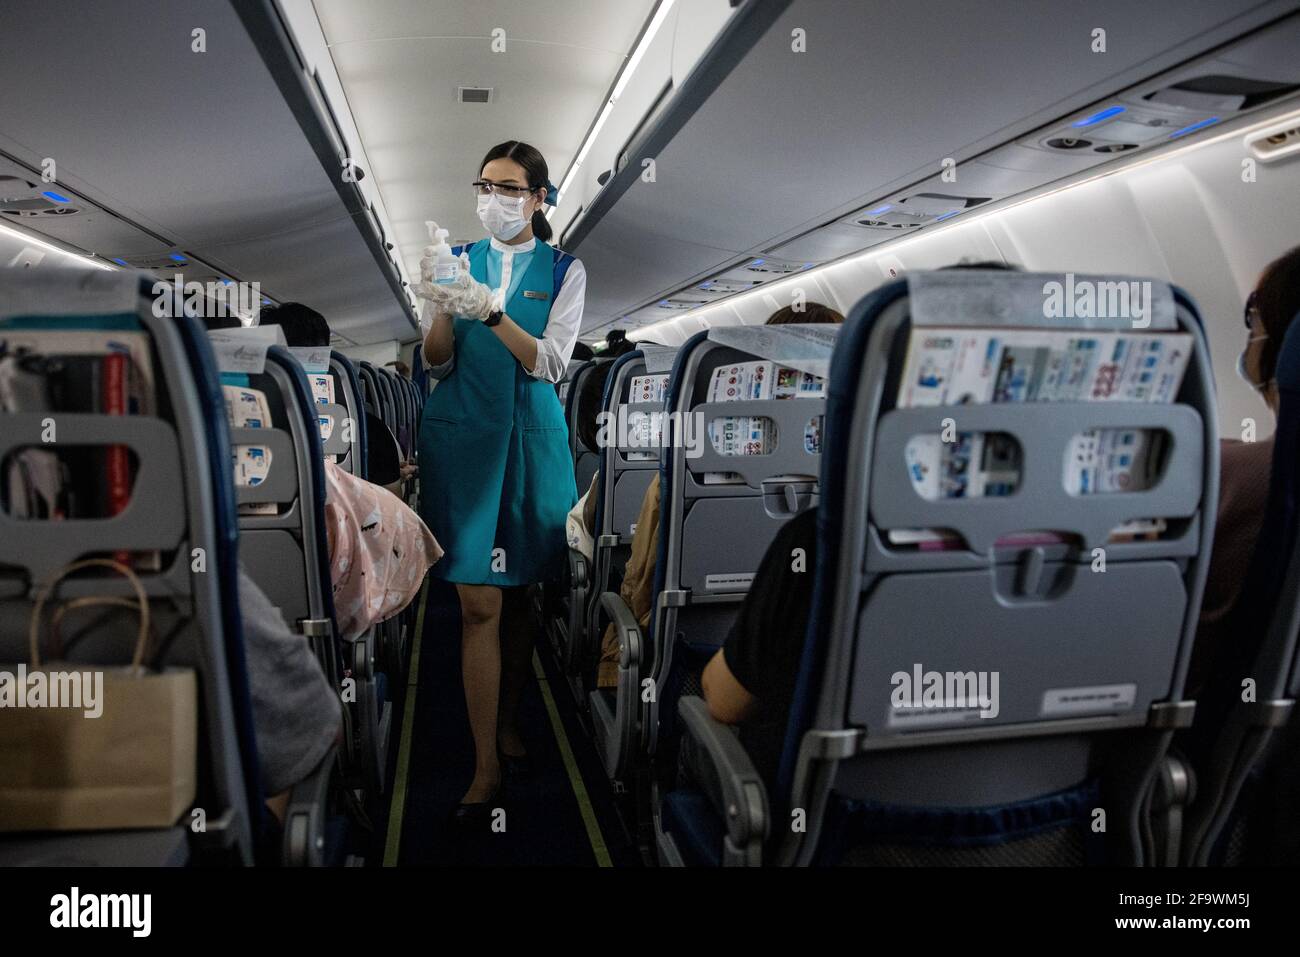 A member of Bangkok Airways cabin crew, wearing a face mask and protective glasses offers hand sanitiser to passengers on board a flight from Bangkok Suvarnabhumi Airport to Koh Samui, Thailand on March 8, 2021 during the global covid-19 pandemic. Stock Photo